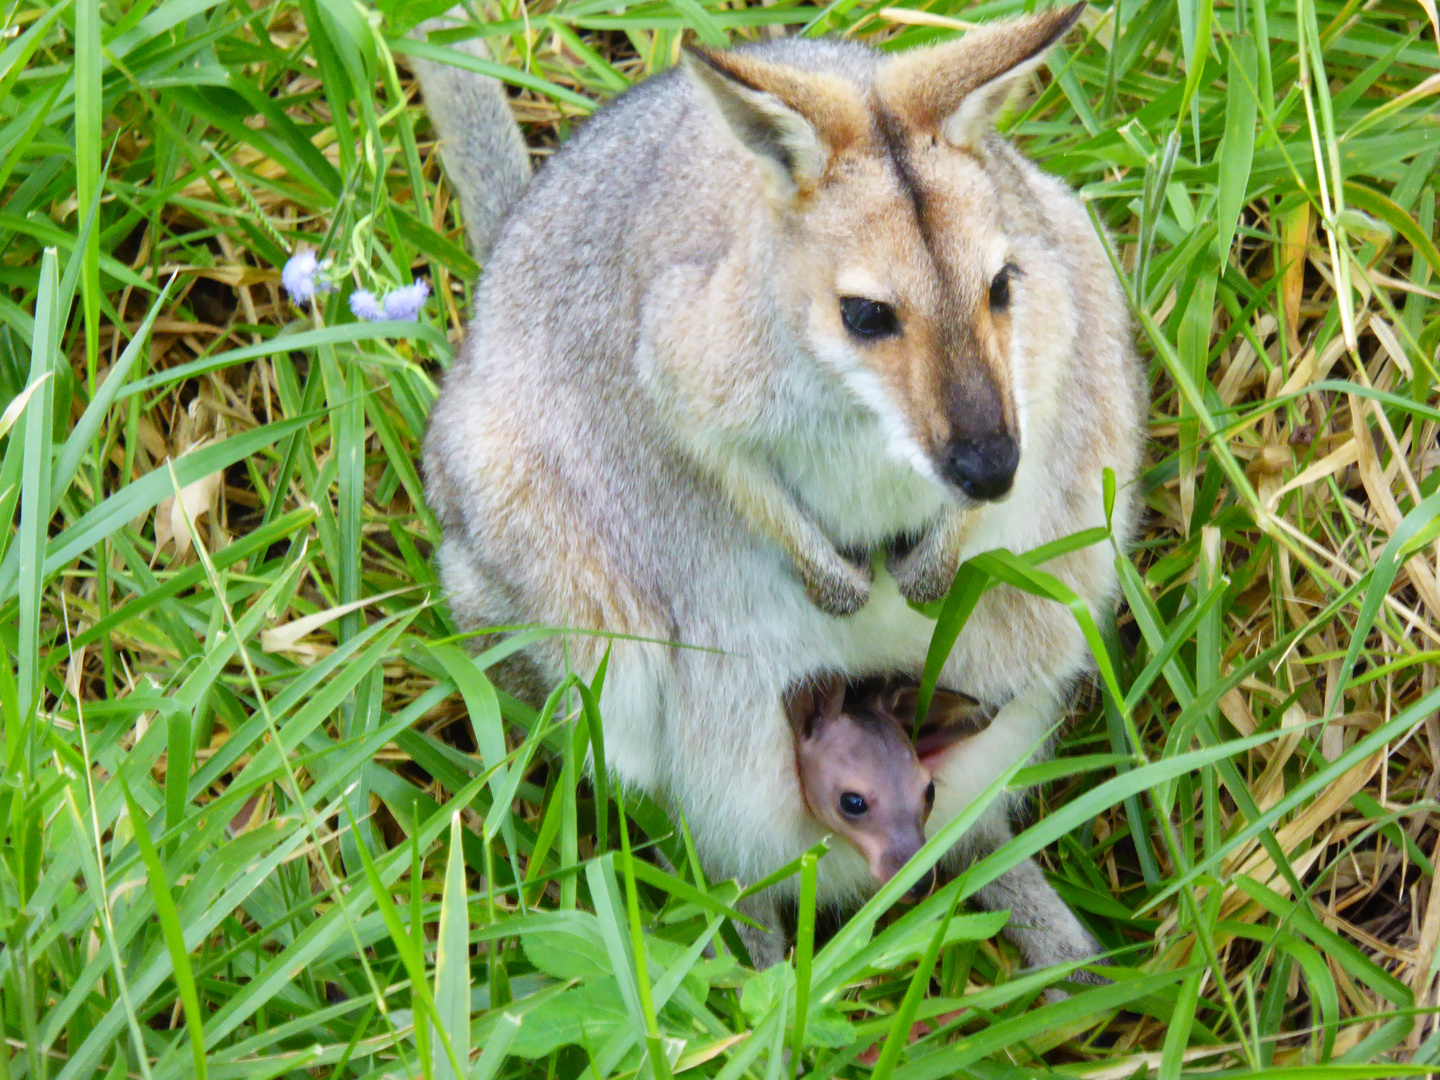 Kangaroo with Joey in pouch in the wild at Simoret Winery